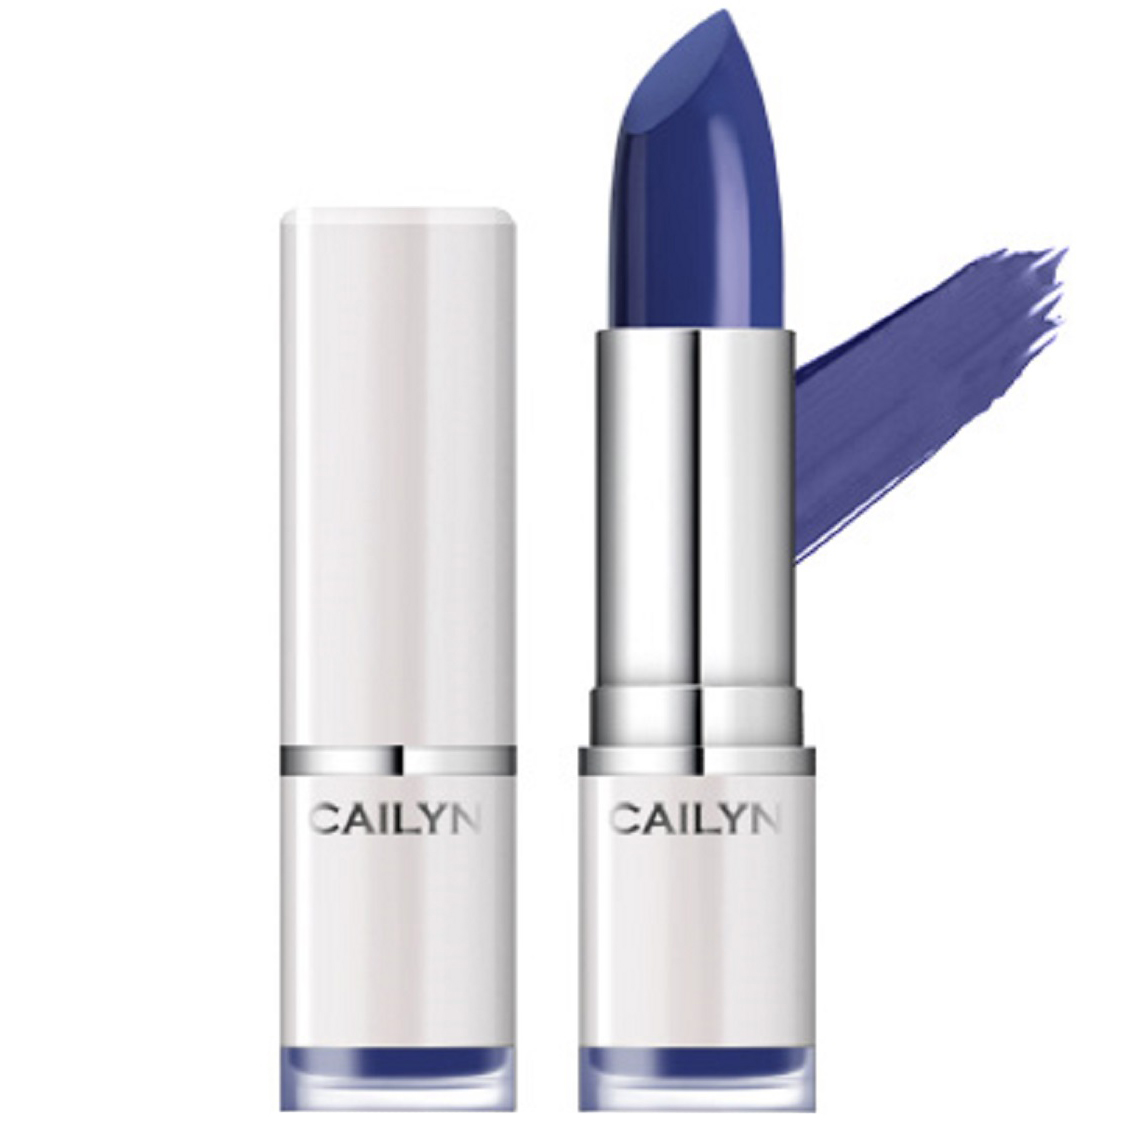 Cailyn Pure Luxe Lipstick, 5 g Cailyn Cosmetics Leppestift